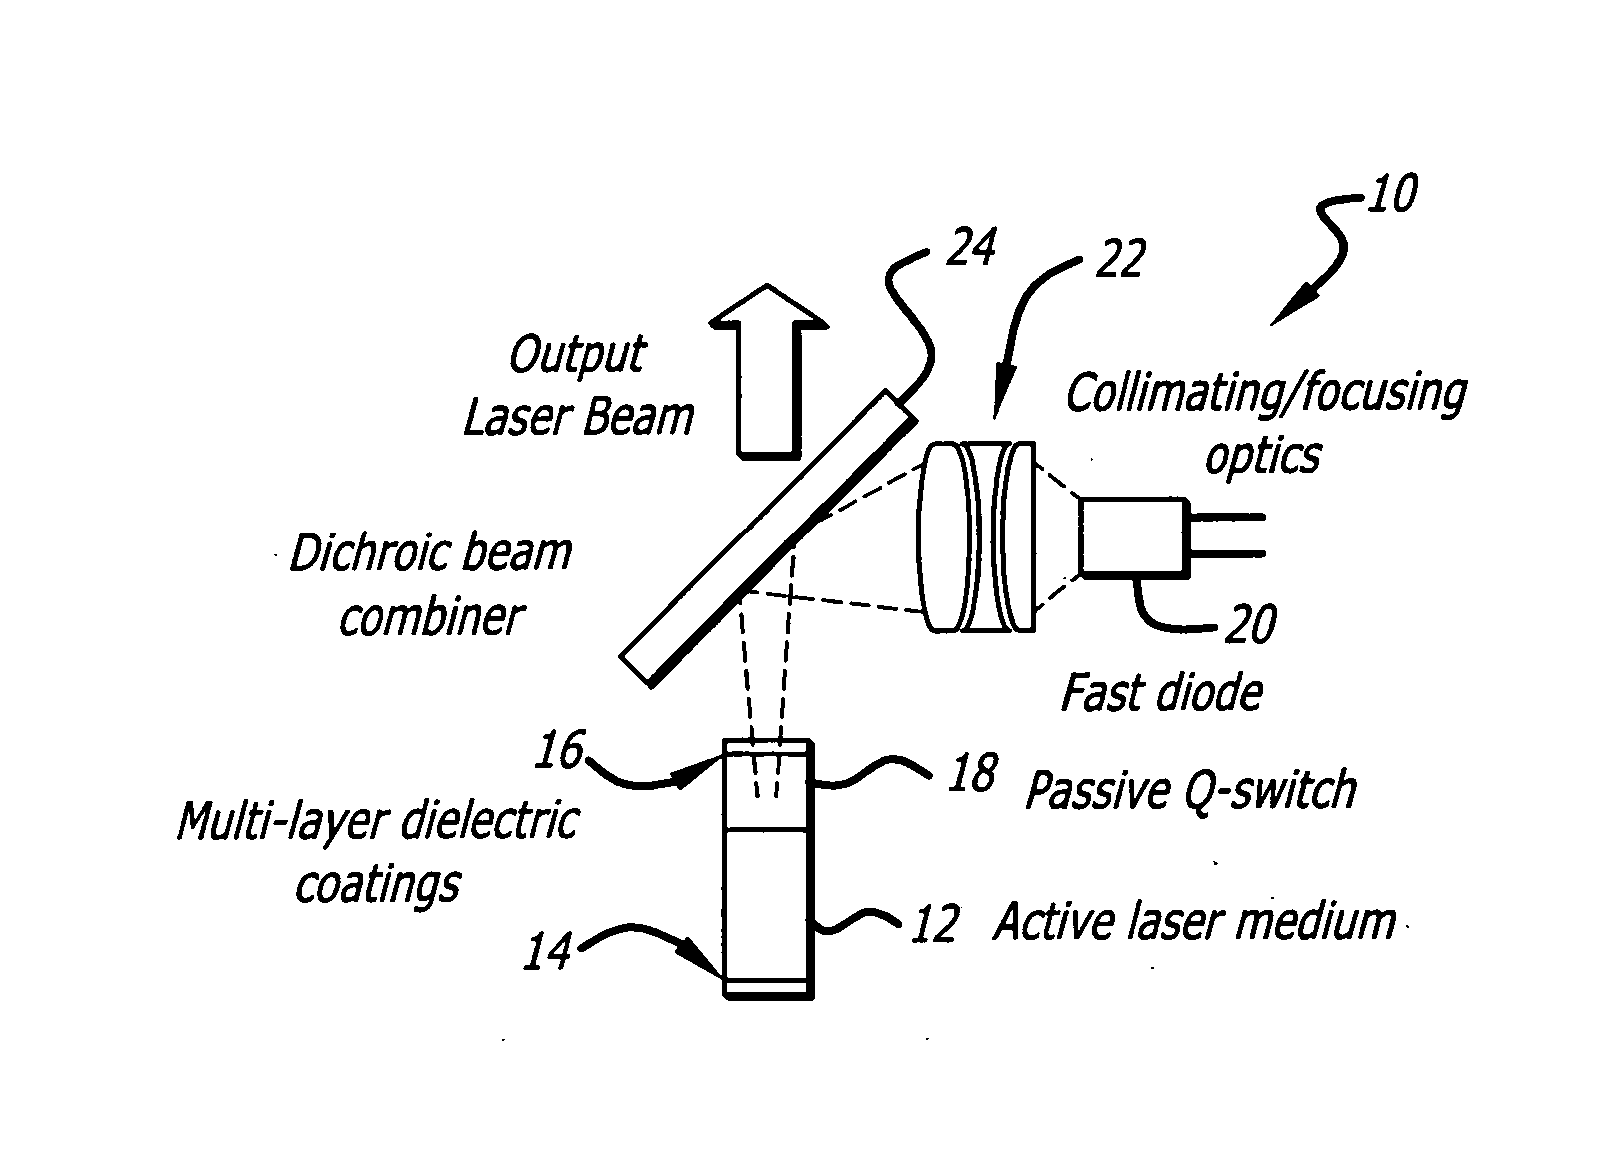 Modulated saturable absorber controlled laser